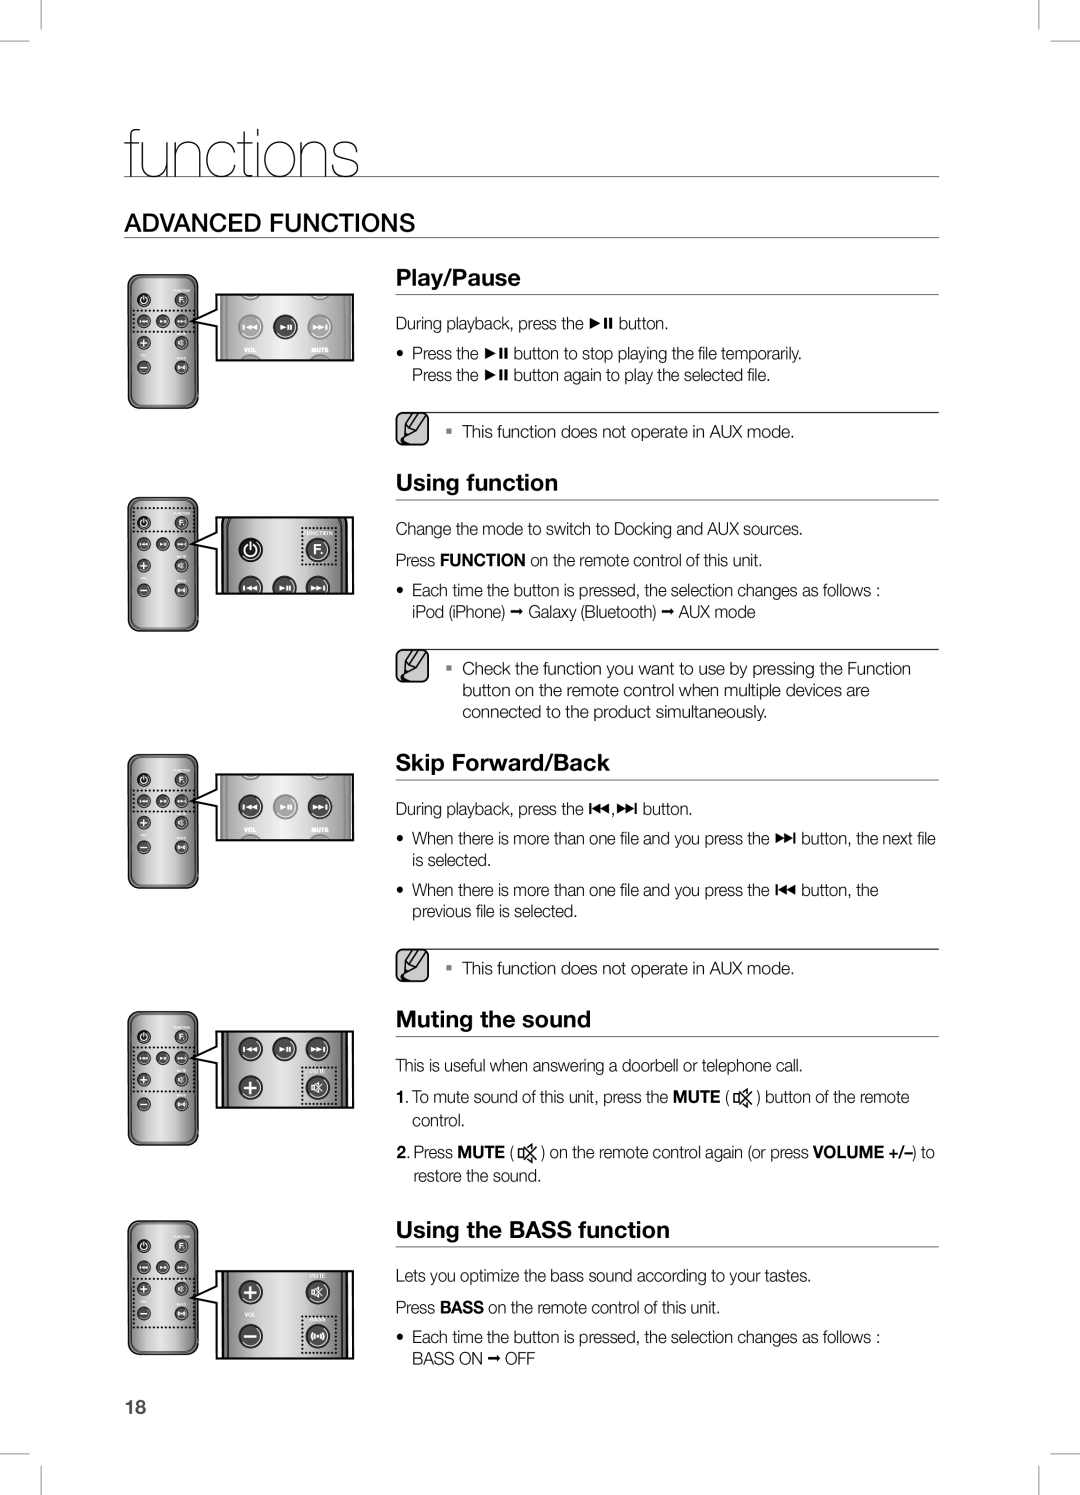 Samsung DA-E570 user manual advanced functions, Play/Pause, Using function, Skip Forward/Back, Muting the sound 